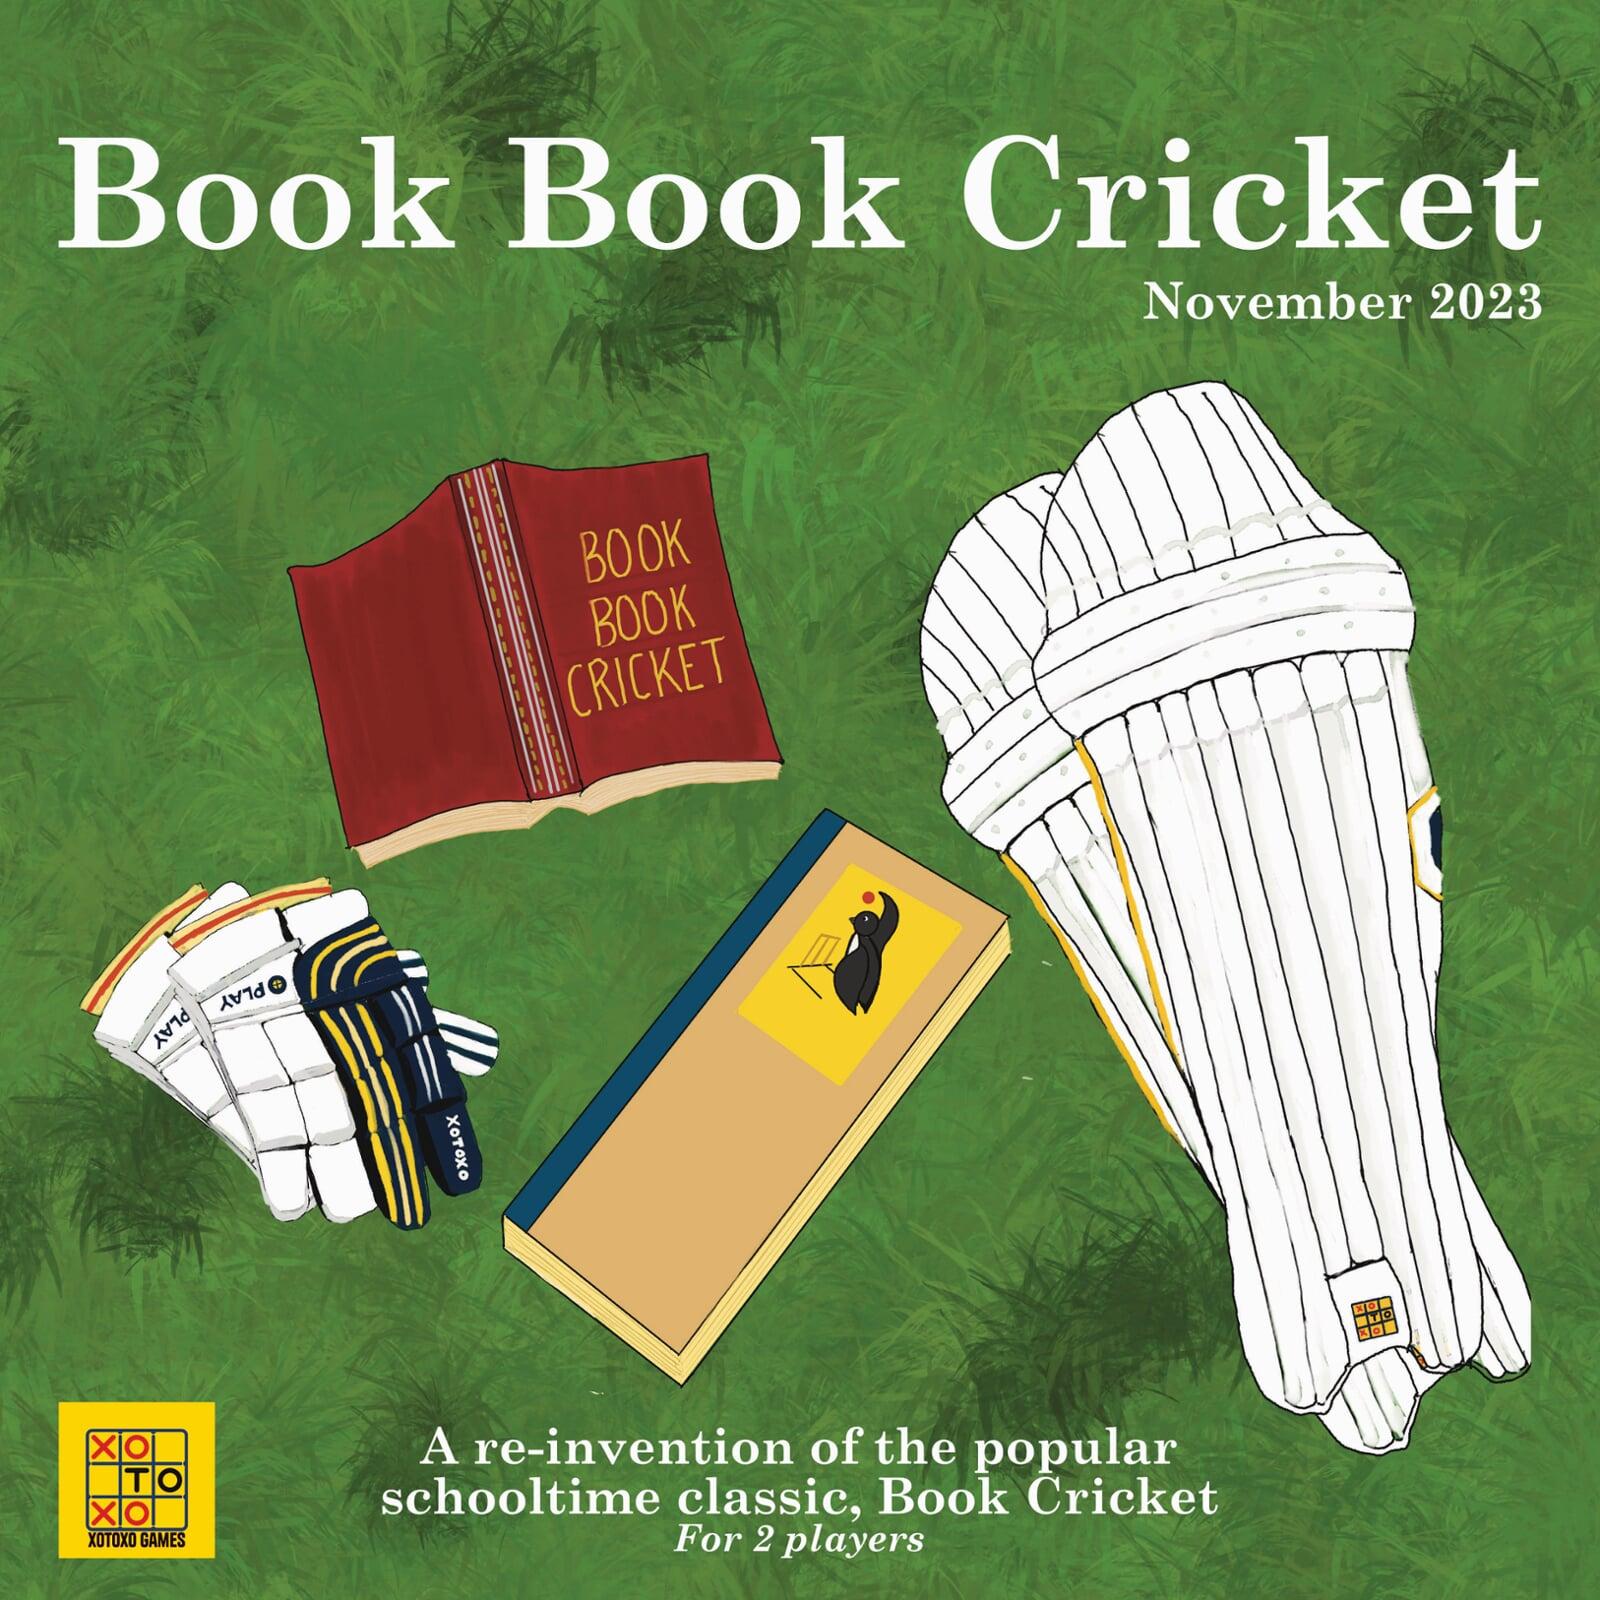 Book Book Cricket - a reinvention of the popular schooltime classic, Book Cricket. For 2 players. Image shows a set of batting gloves and pads, laid out on the grass next to two books, one coloured like a cricket ball, and the other coloured like a cricket bat.